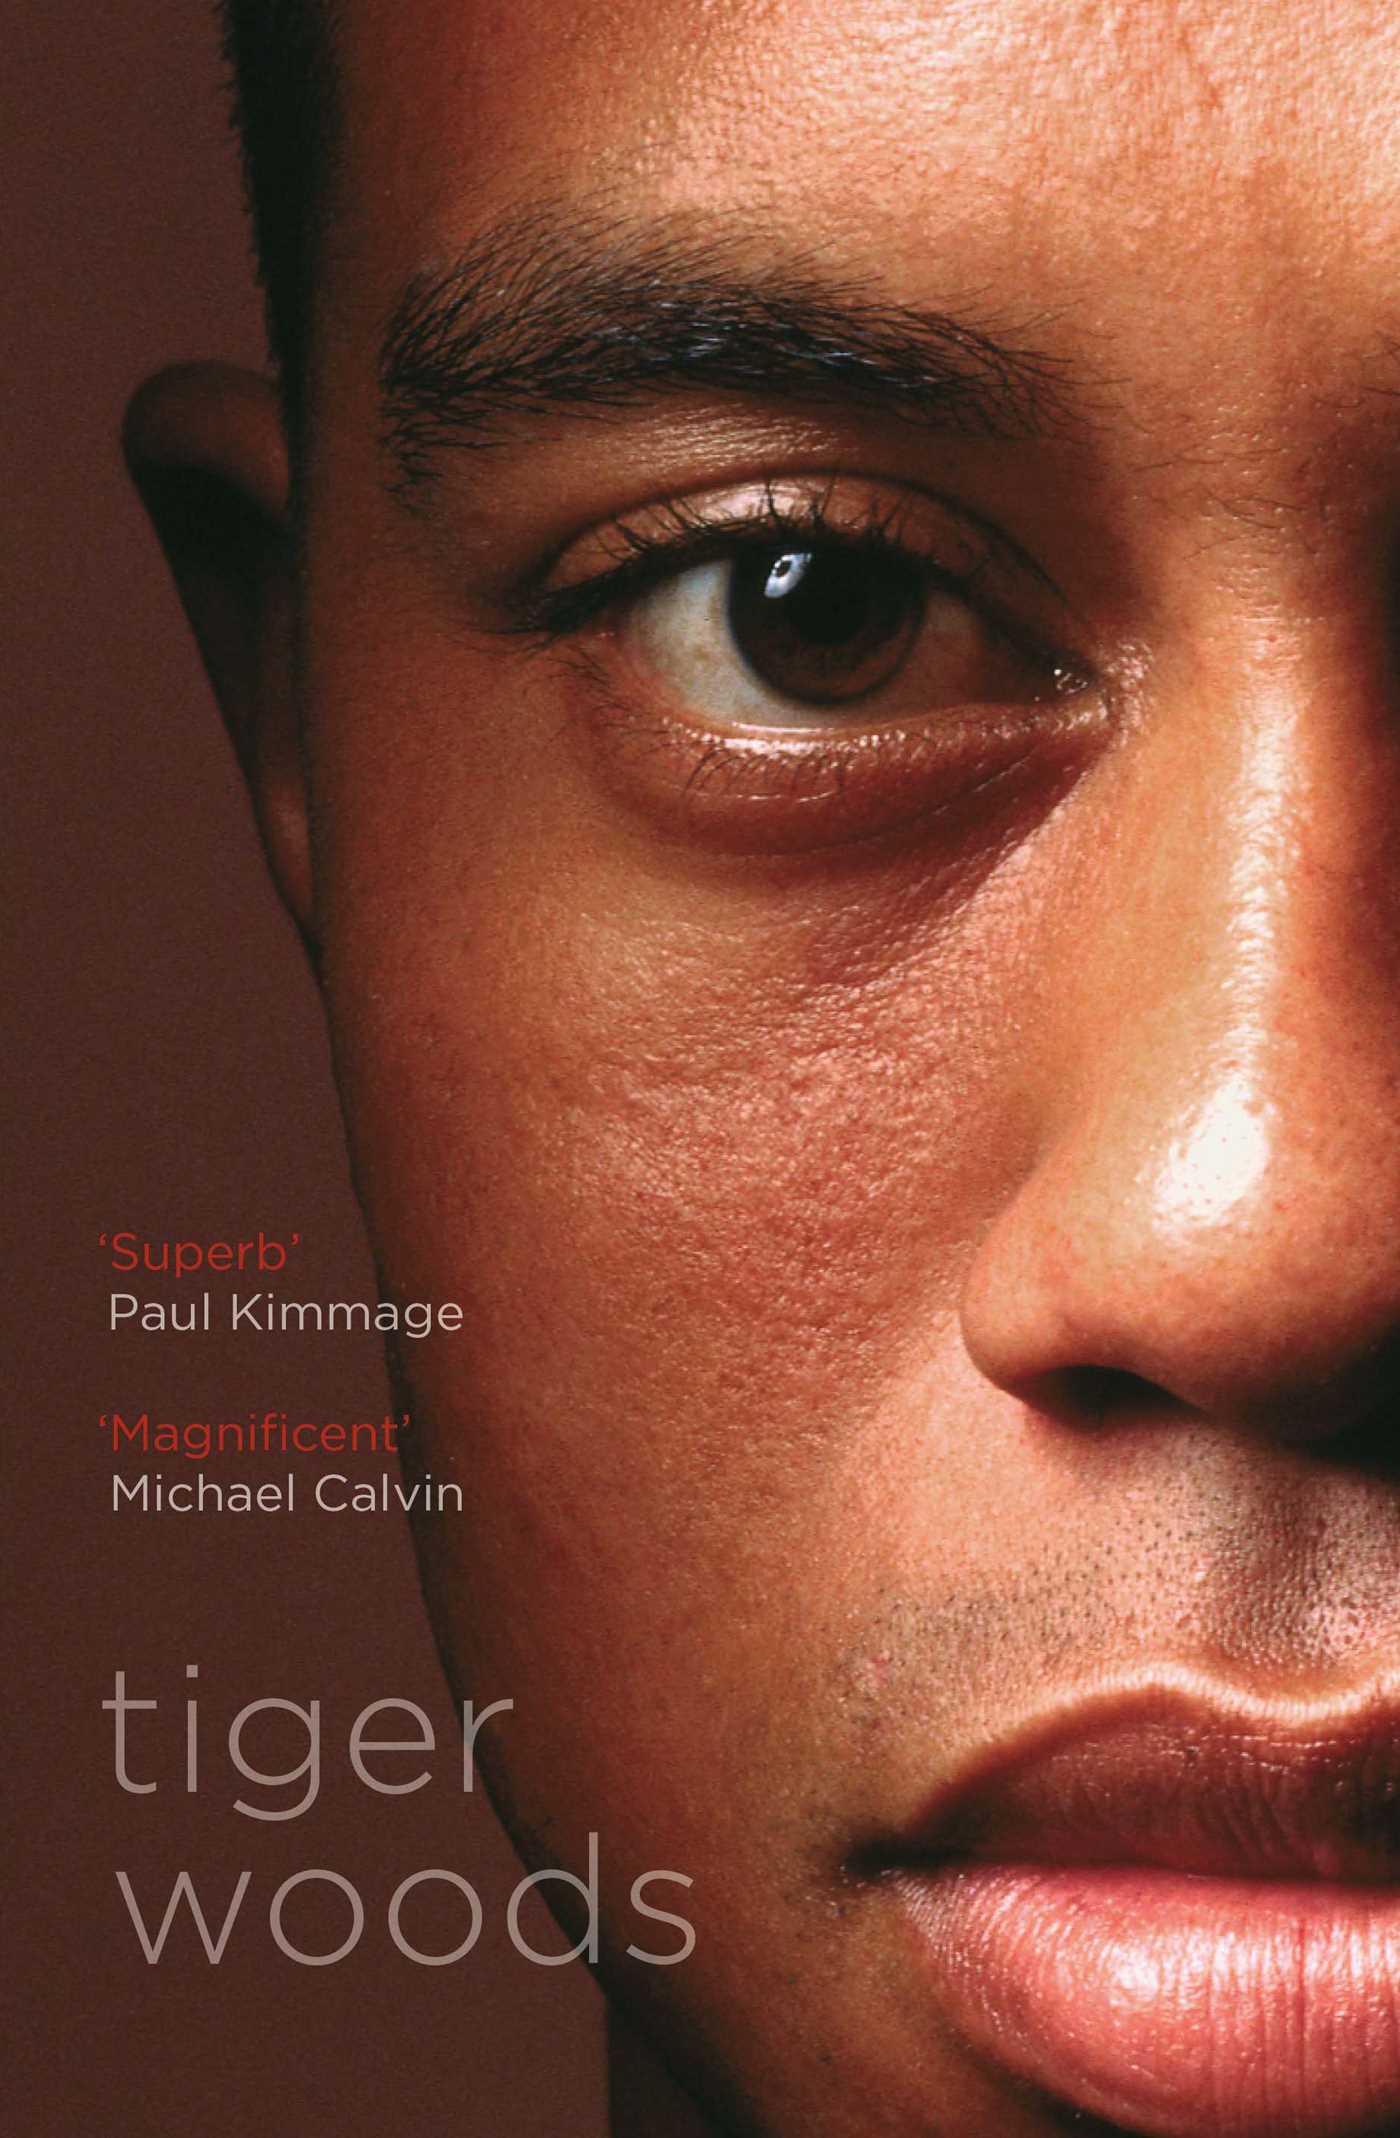 Exclusive excerpts: The Tiger Woods Story